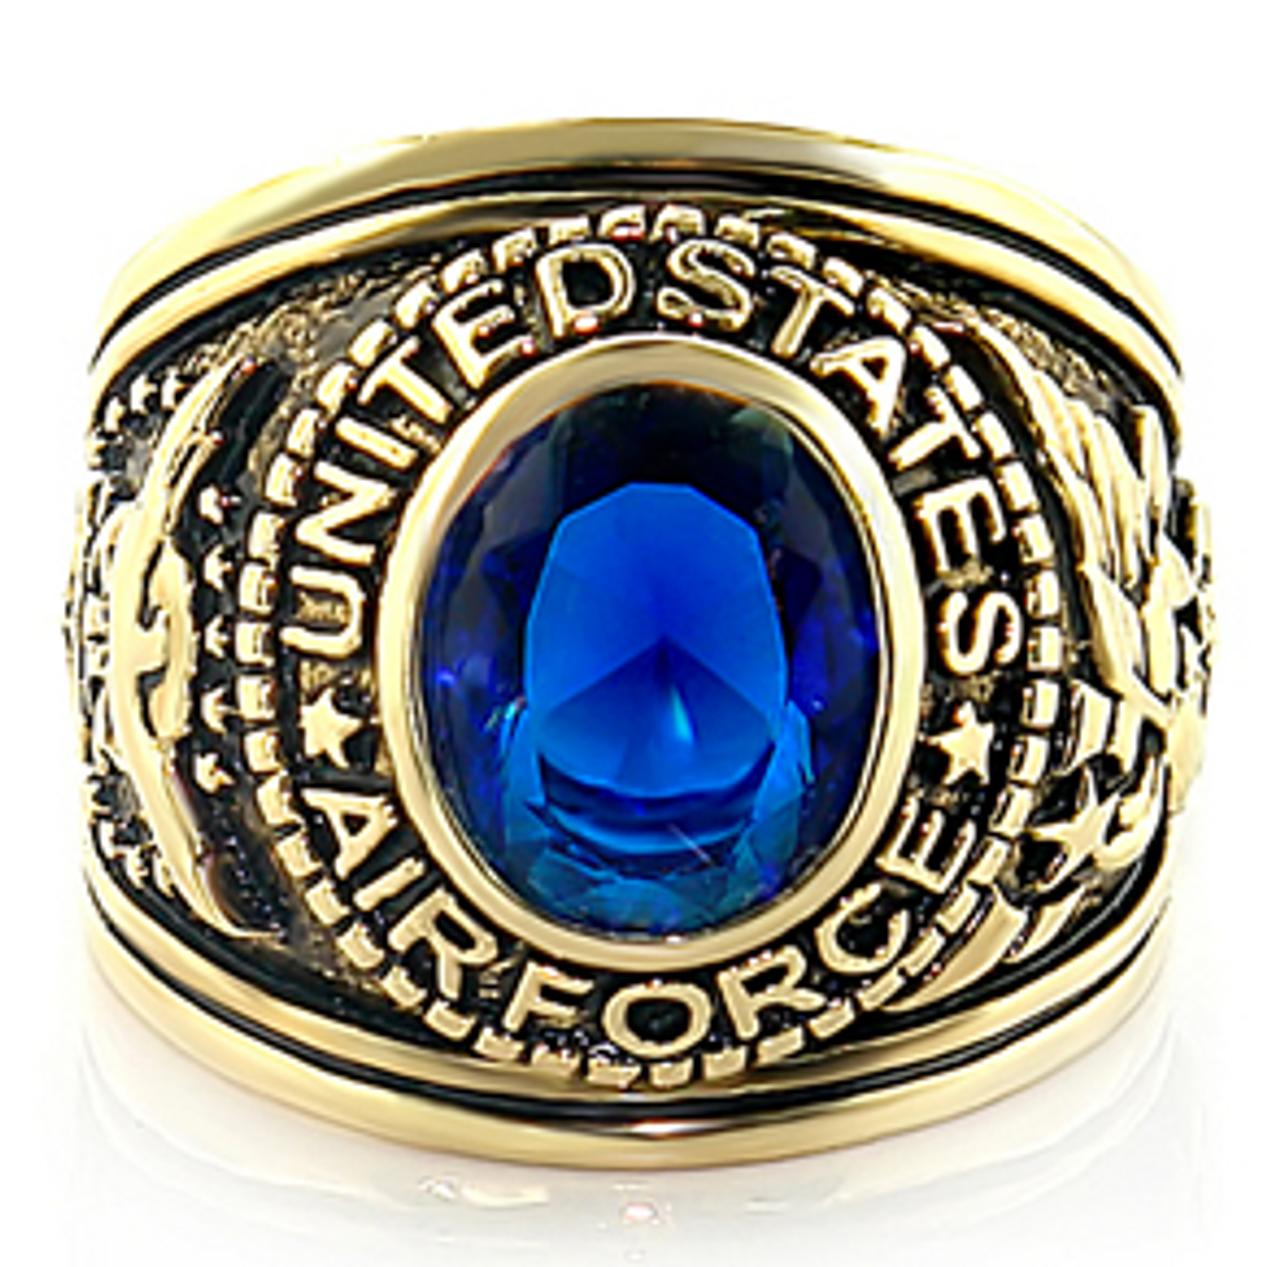 Air Force - USAF Military Ring (Gold with Blue Stone)